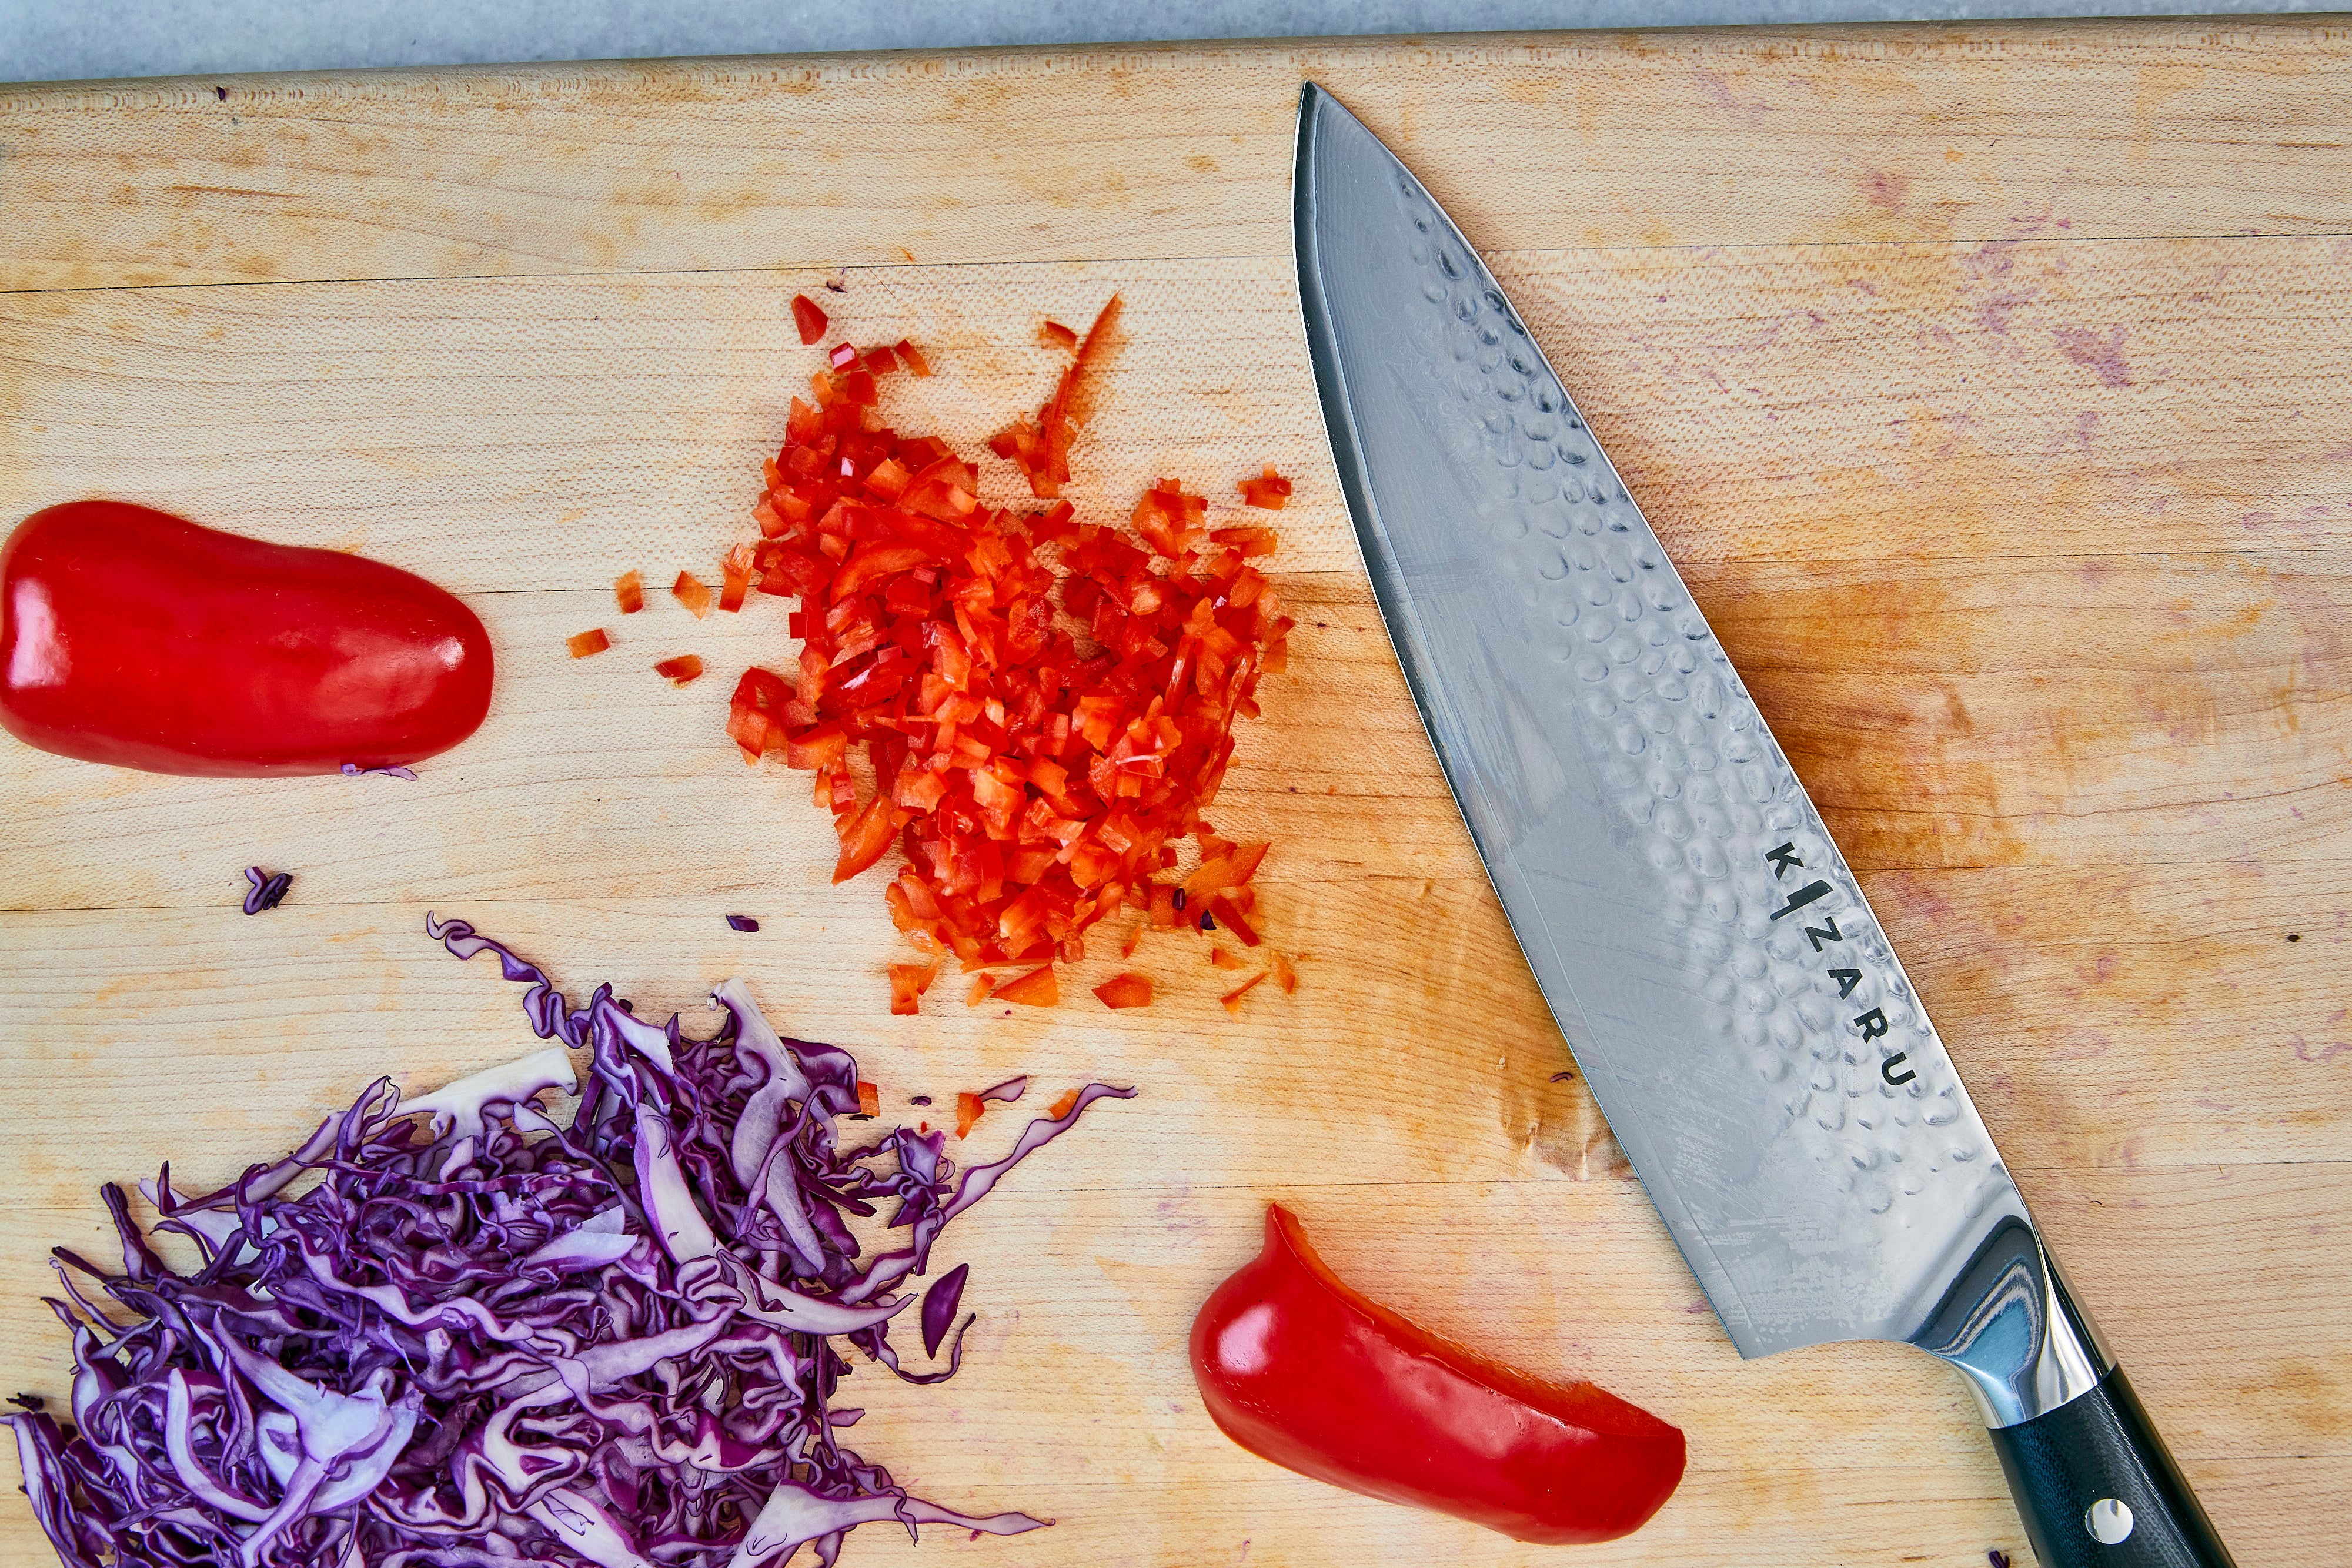 What's The Best Steel For Kitchen Knives? | The 6 Most Popular Steel Types